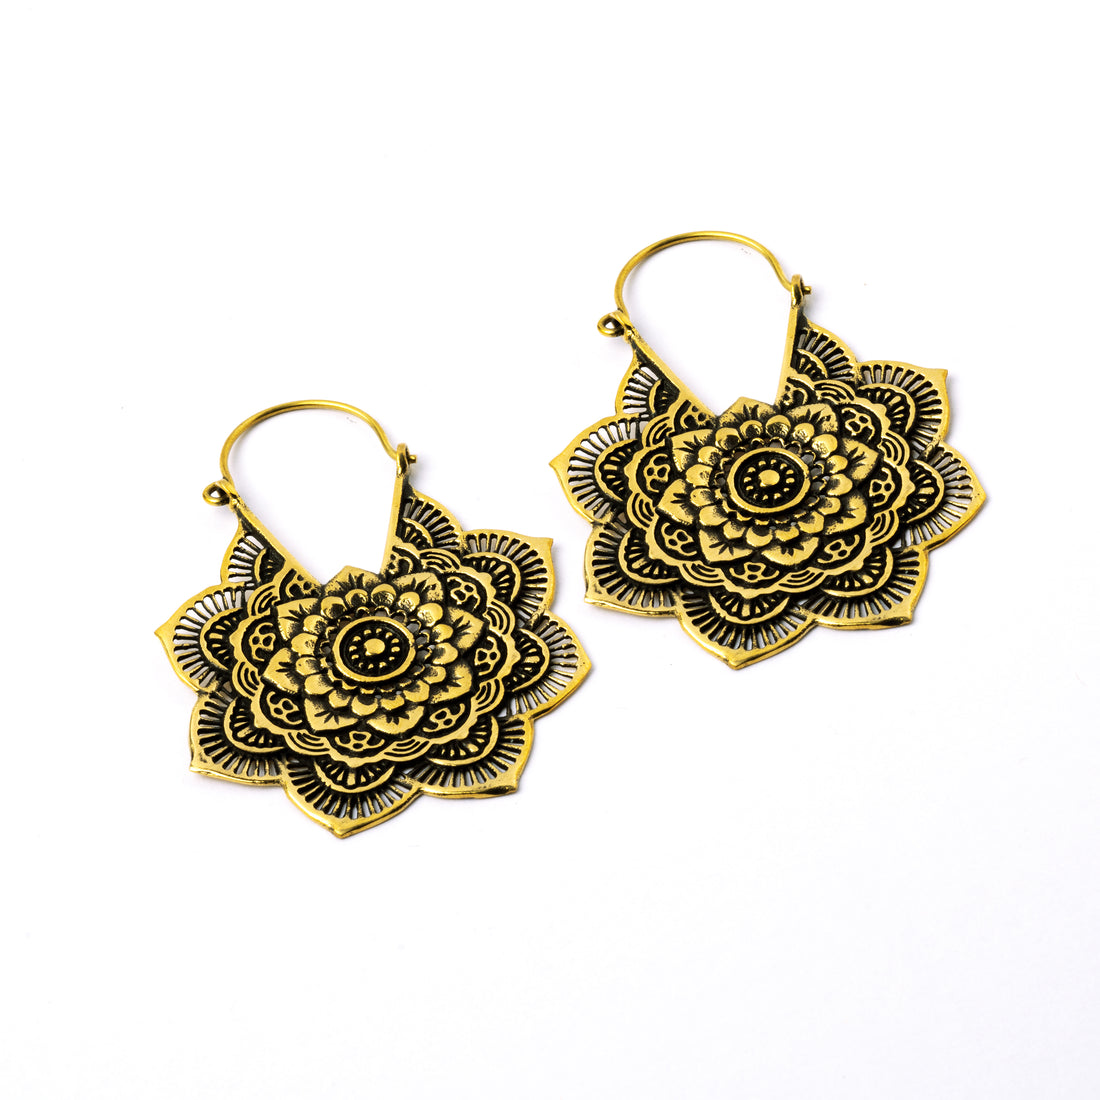 pair of golden brass carved layered flower mandala earrings right side view